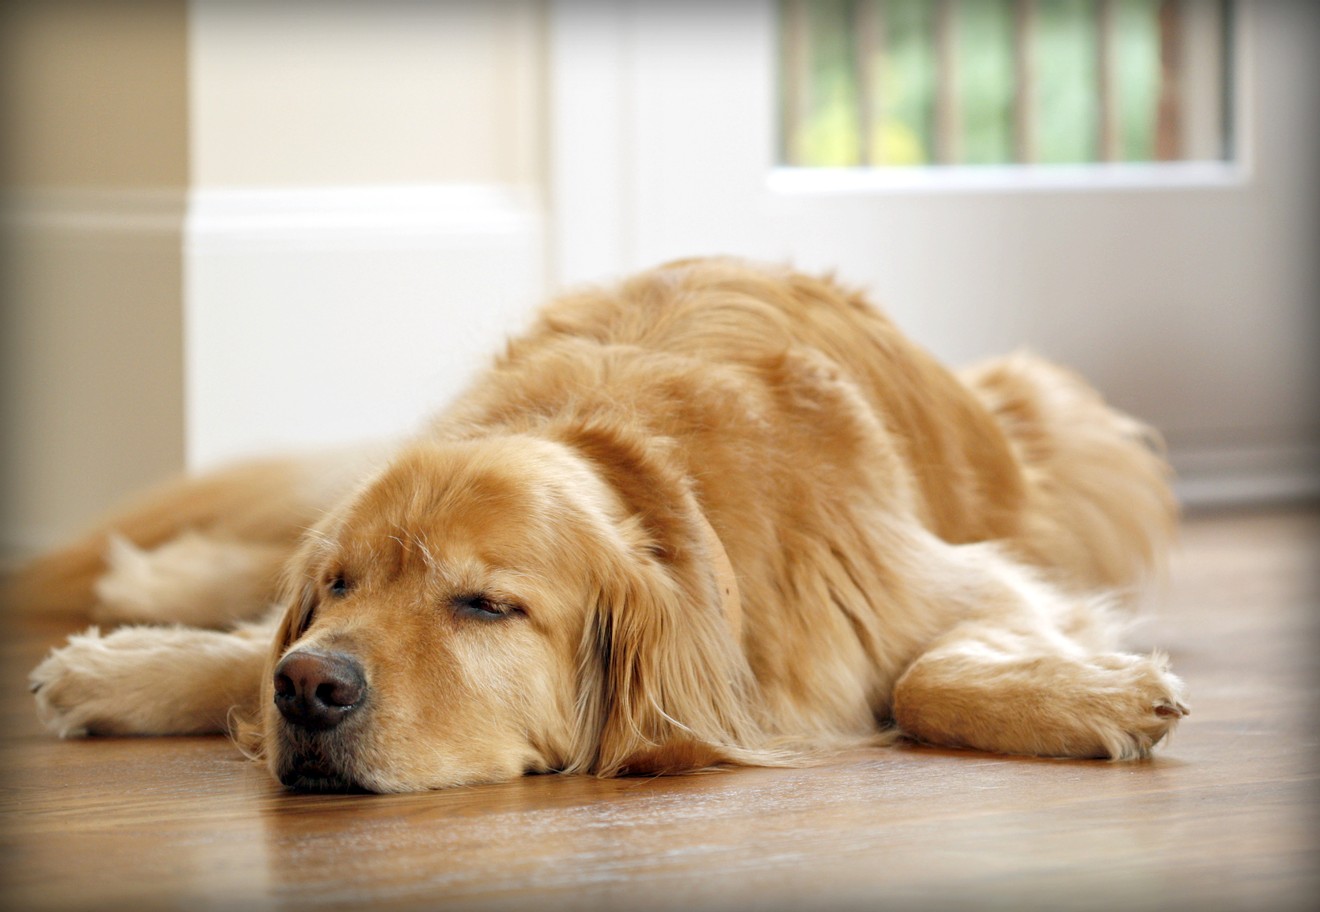 Dogs sleep heavily after ingesting marijuana, but they'll still require attention.